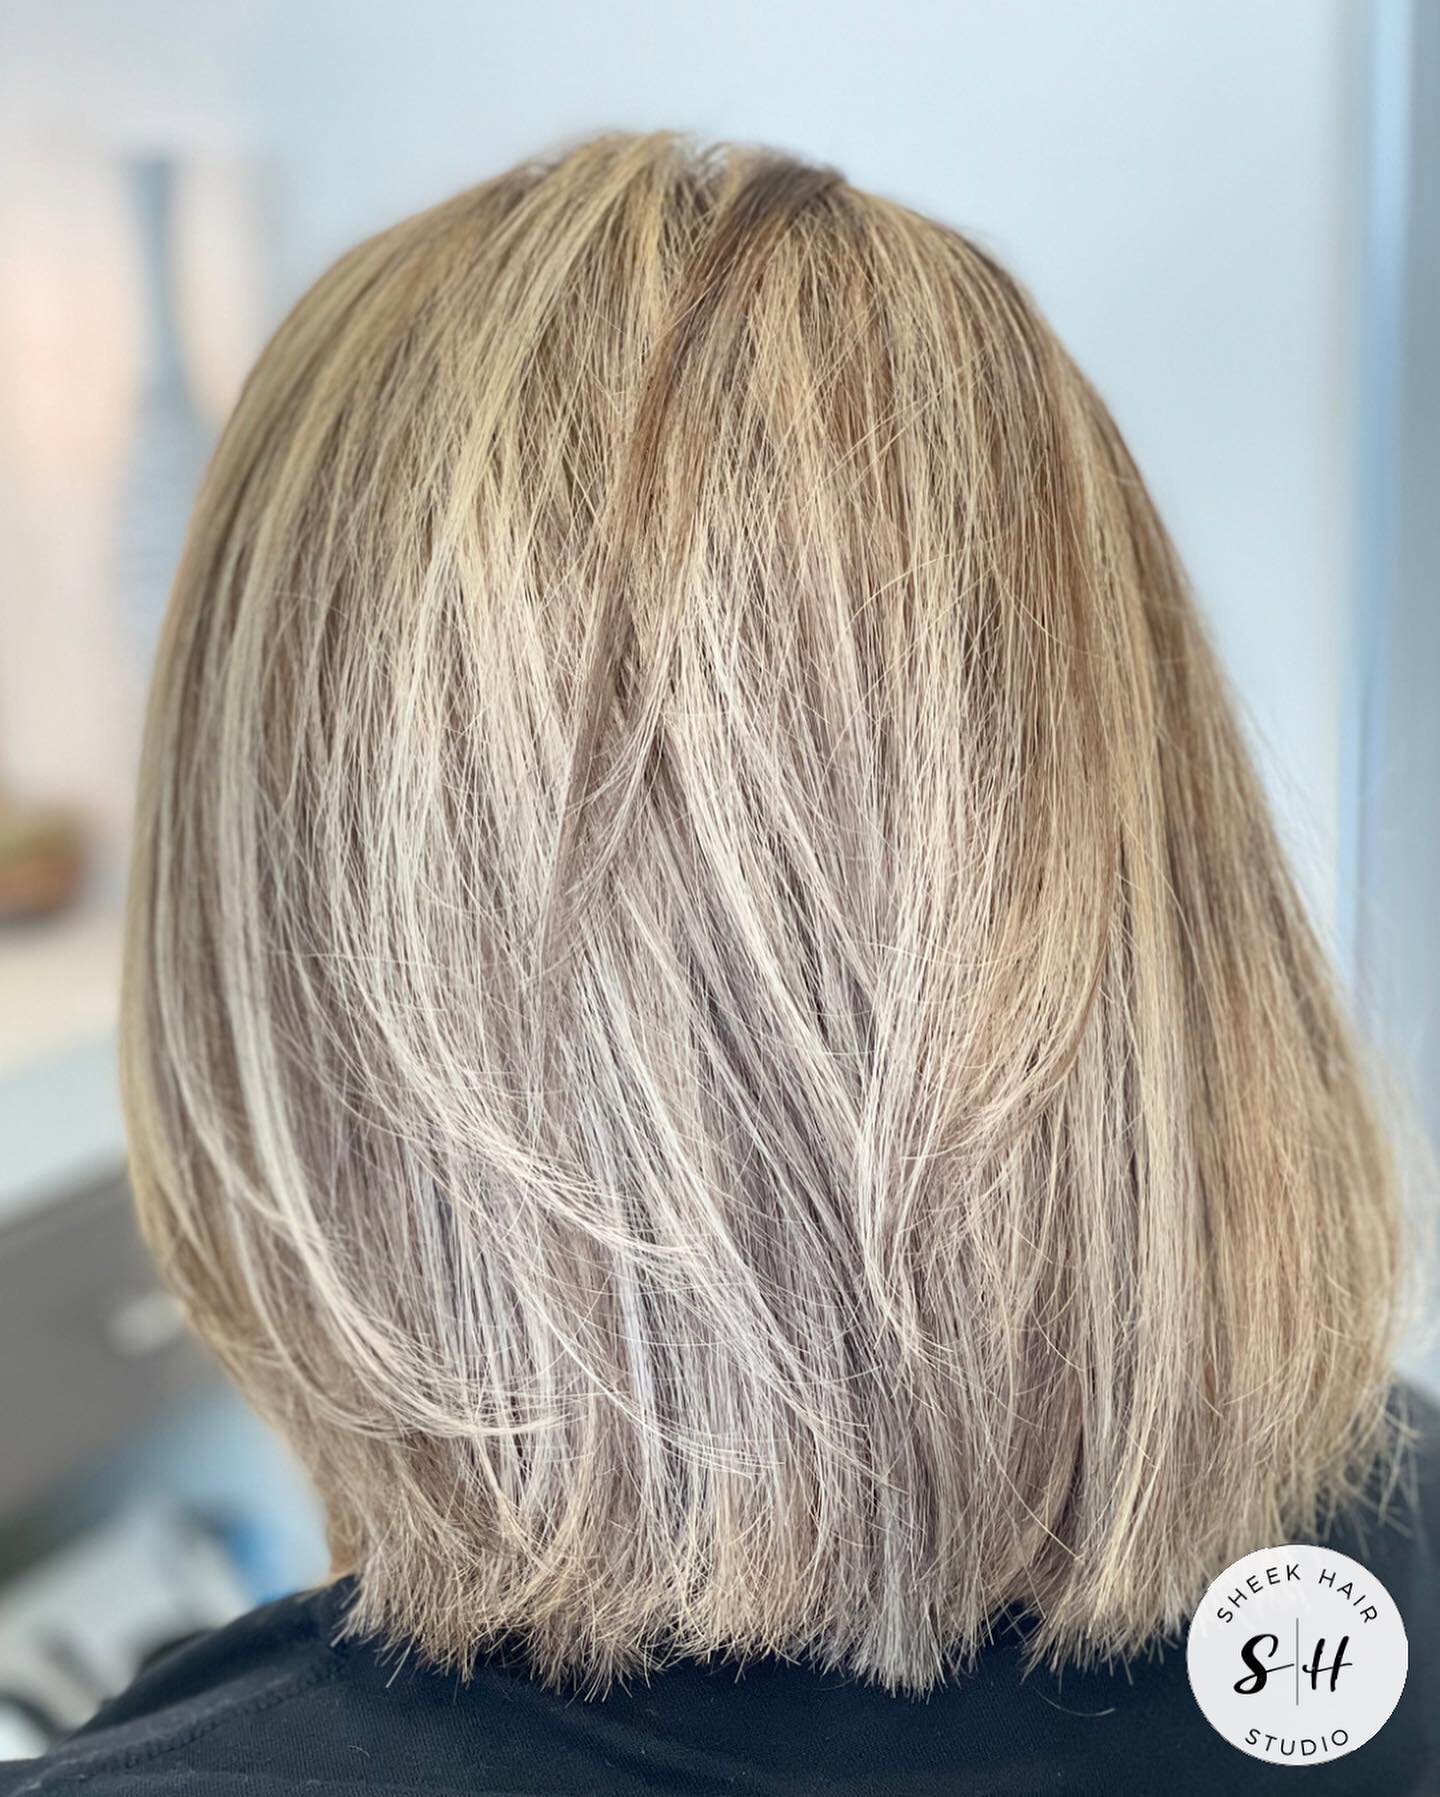 Bye bye to yellow hair! Swipe through images to see before and after! ✨